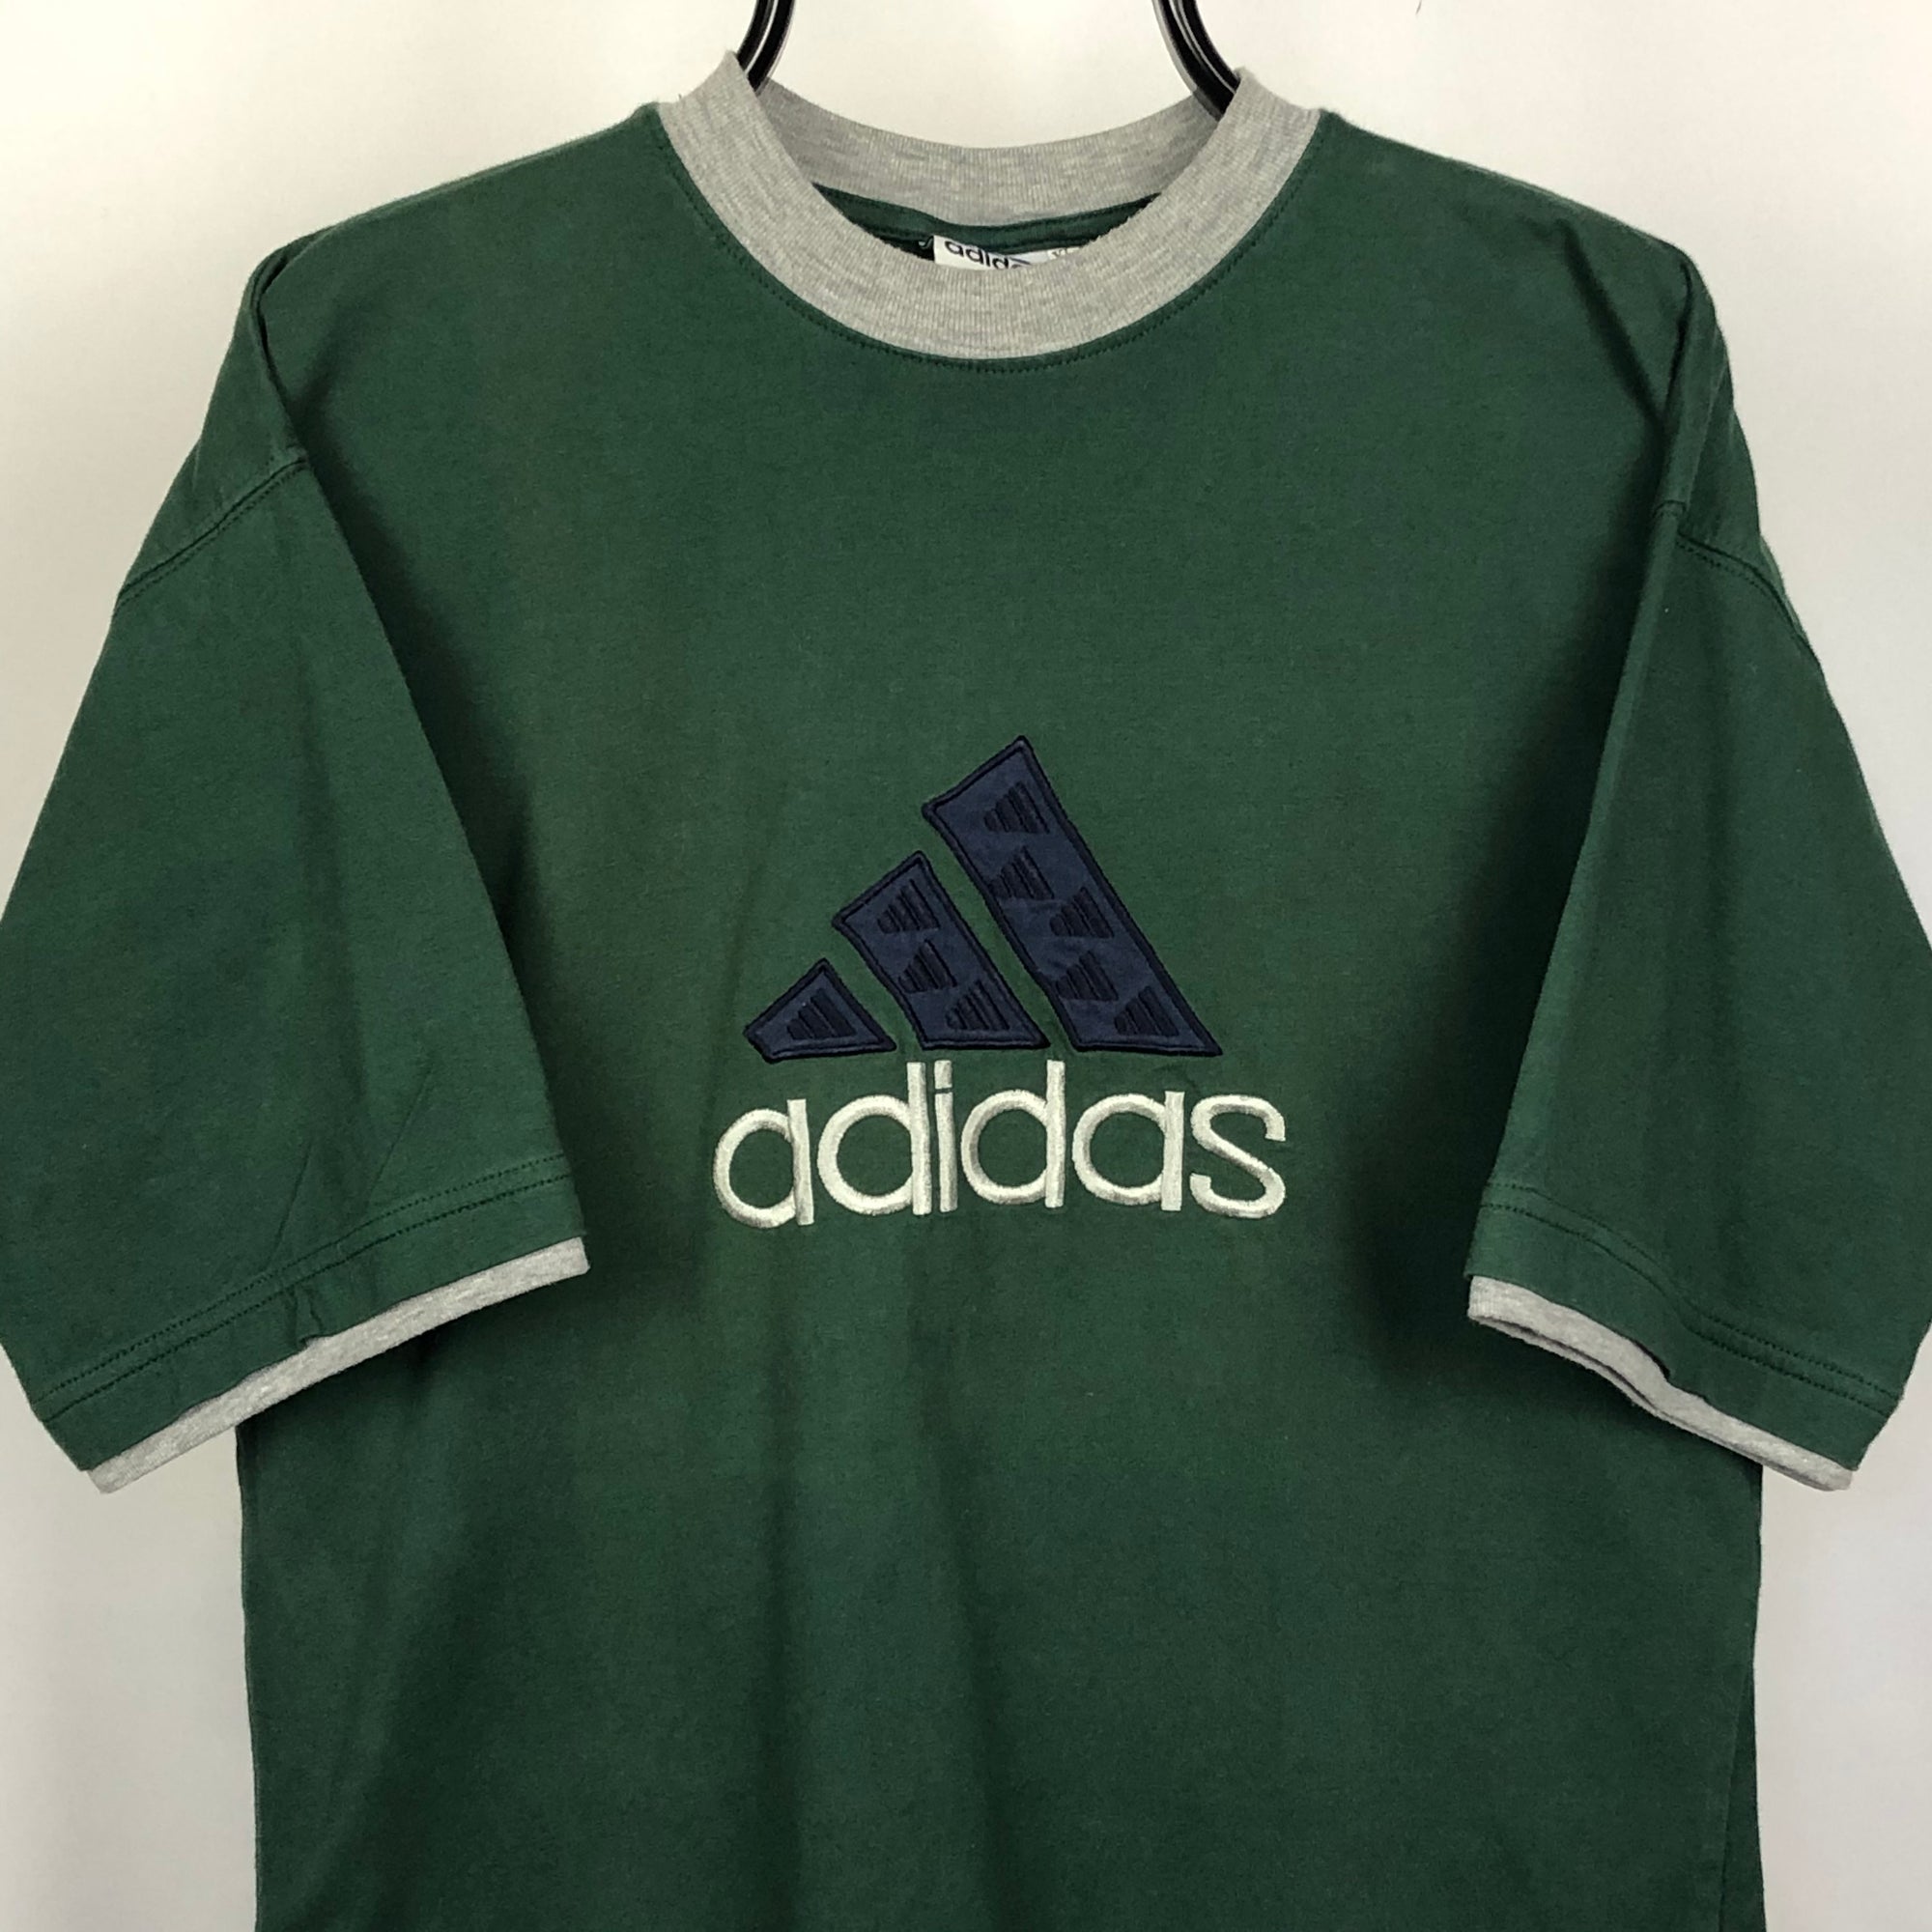 Vintage Adidas Spellout Tee in Green - Men's Large/Women's XL